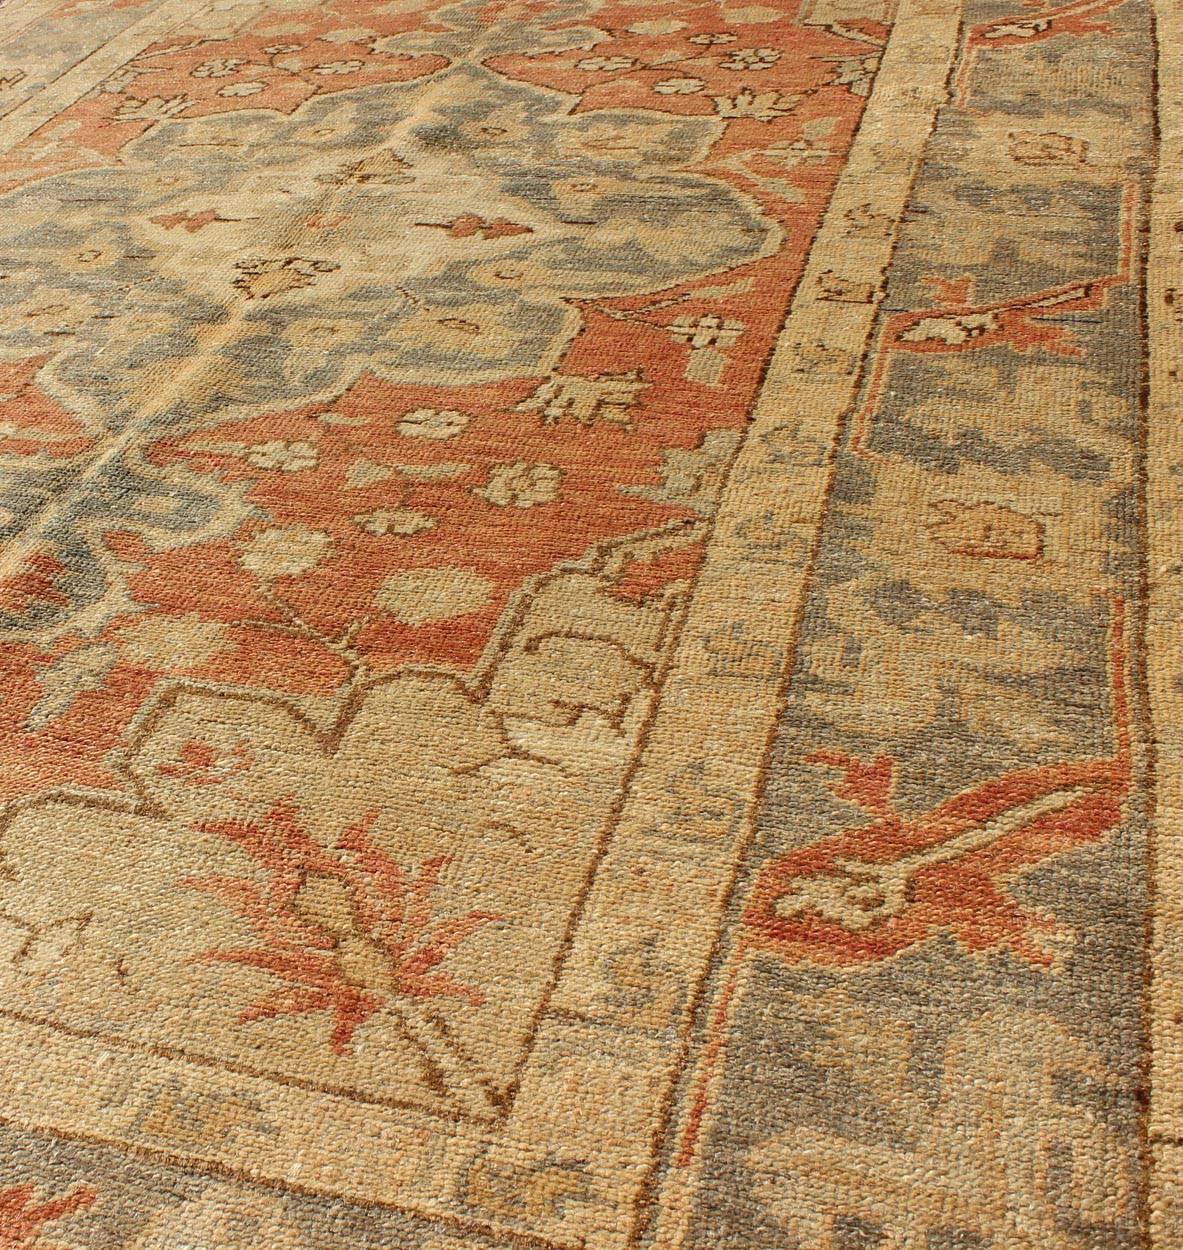 20th Century Antique Turkish Oushak Rug with Floral Motifs in Soft Orange, Grey and Taupe For Sale